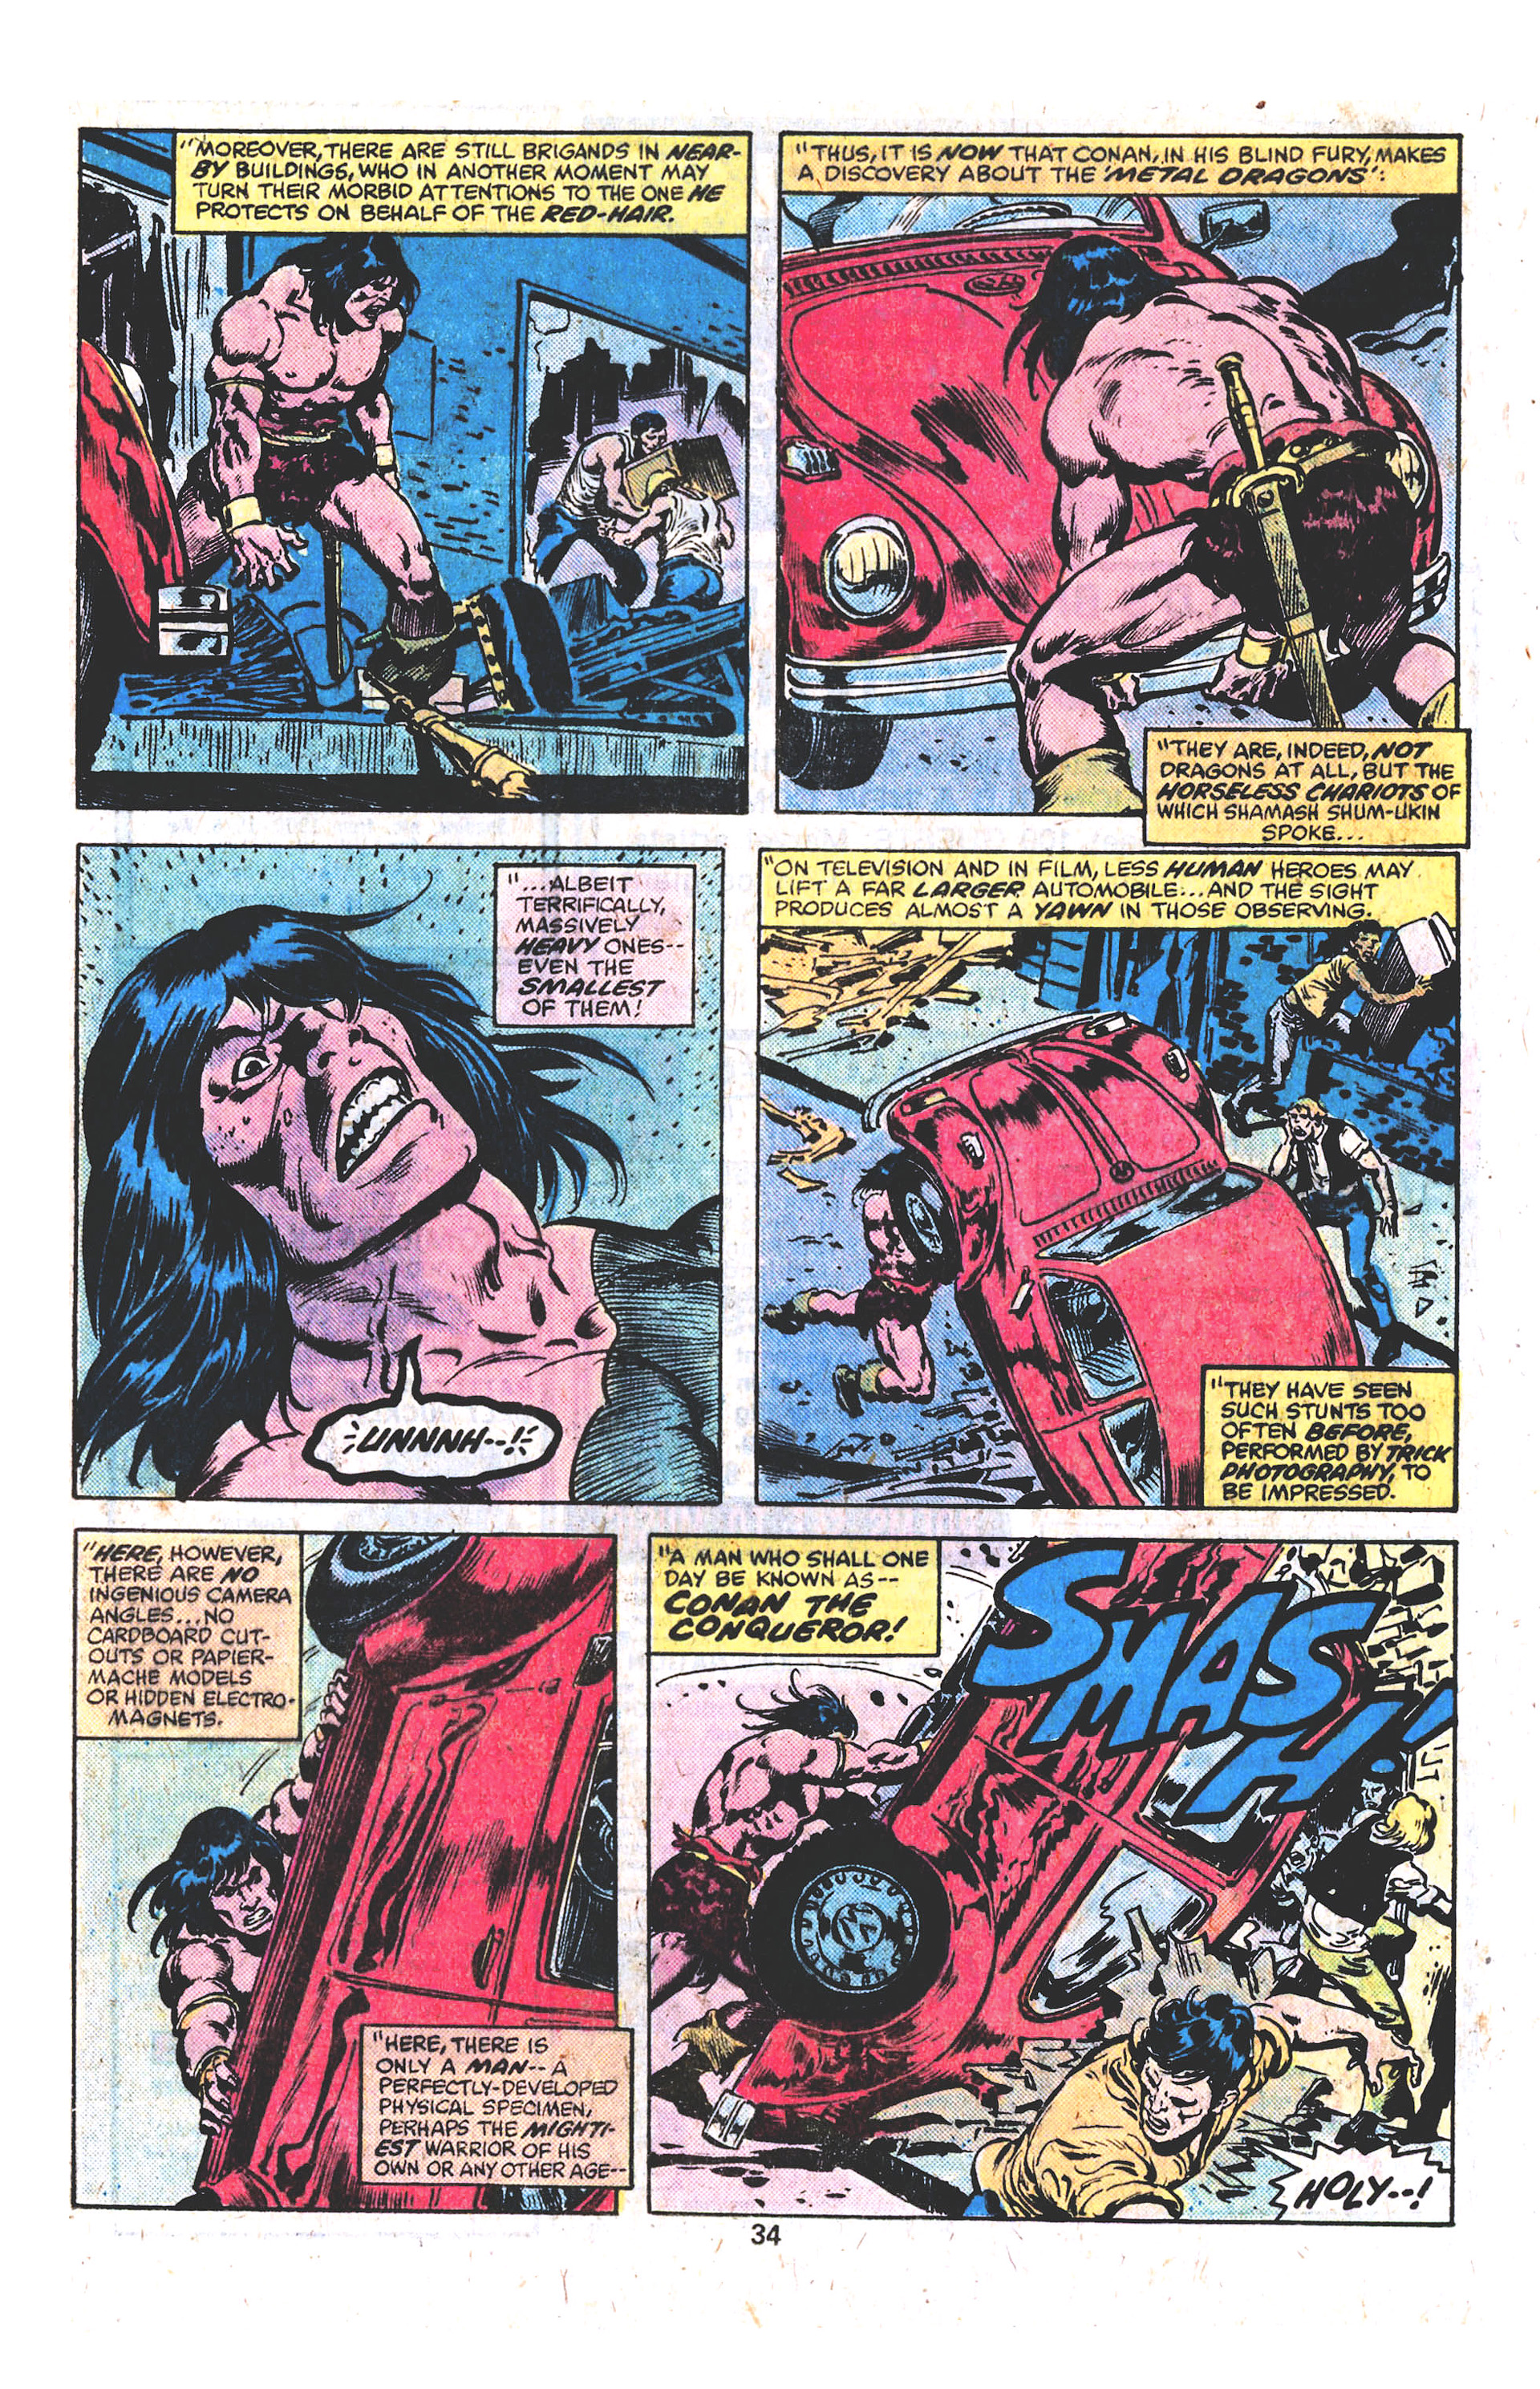 What If? (1977) Issue #13 - Conan The Barbarian walked the Earth Today #13 - English 25